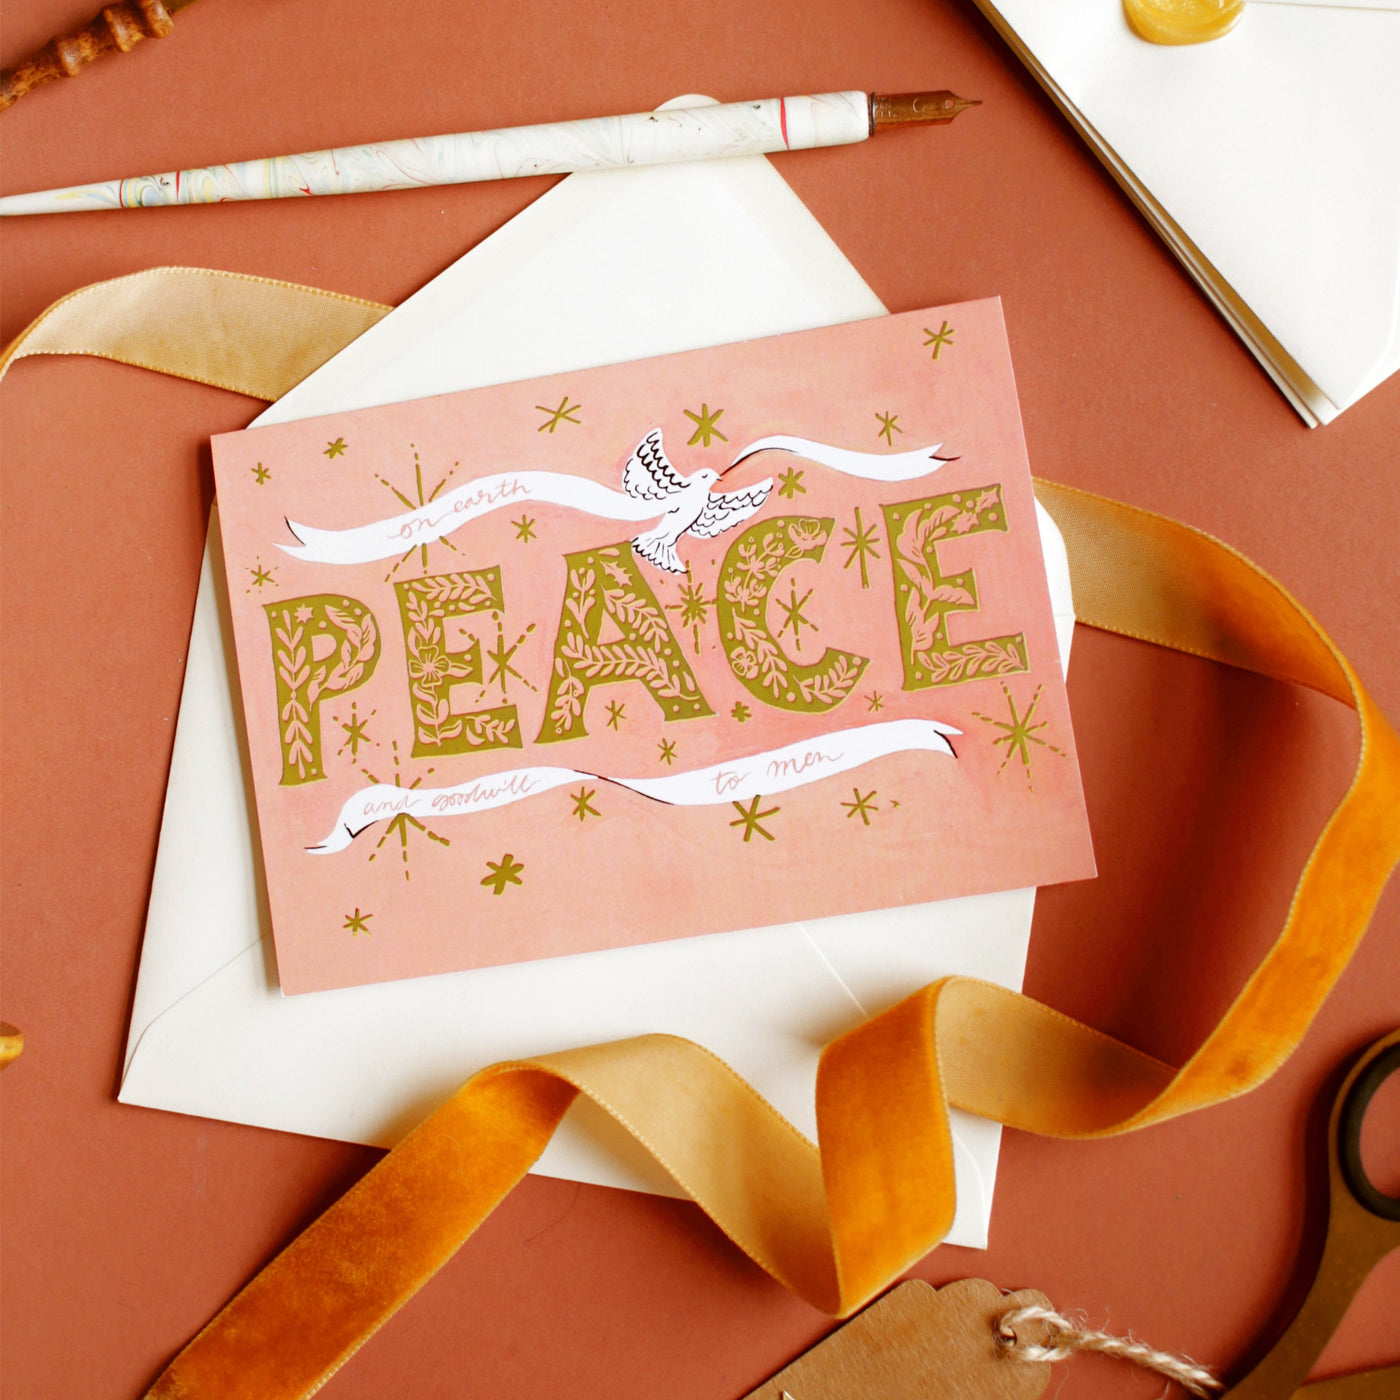 Coral Christmas Card With Gold Peace Lettering And Stars With A White Ribbon And Dove With A Gold Envelope With Orange Velvet Ribbon - Annie Dornan Smith